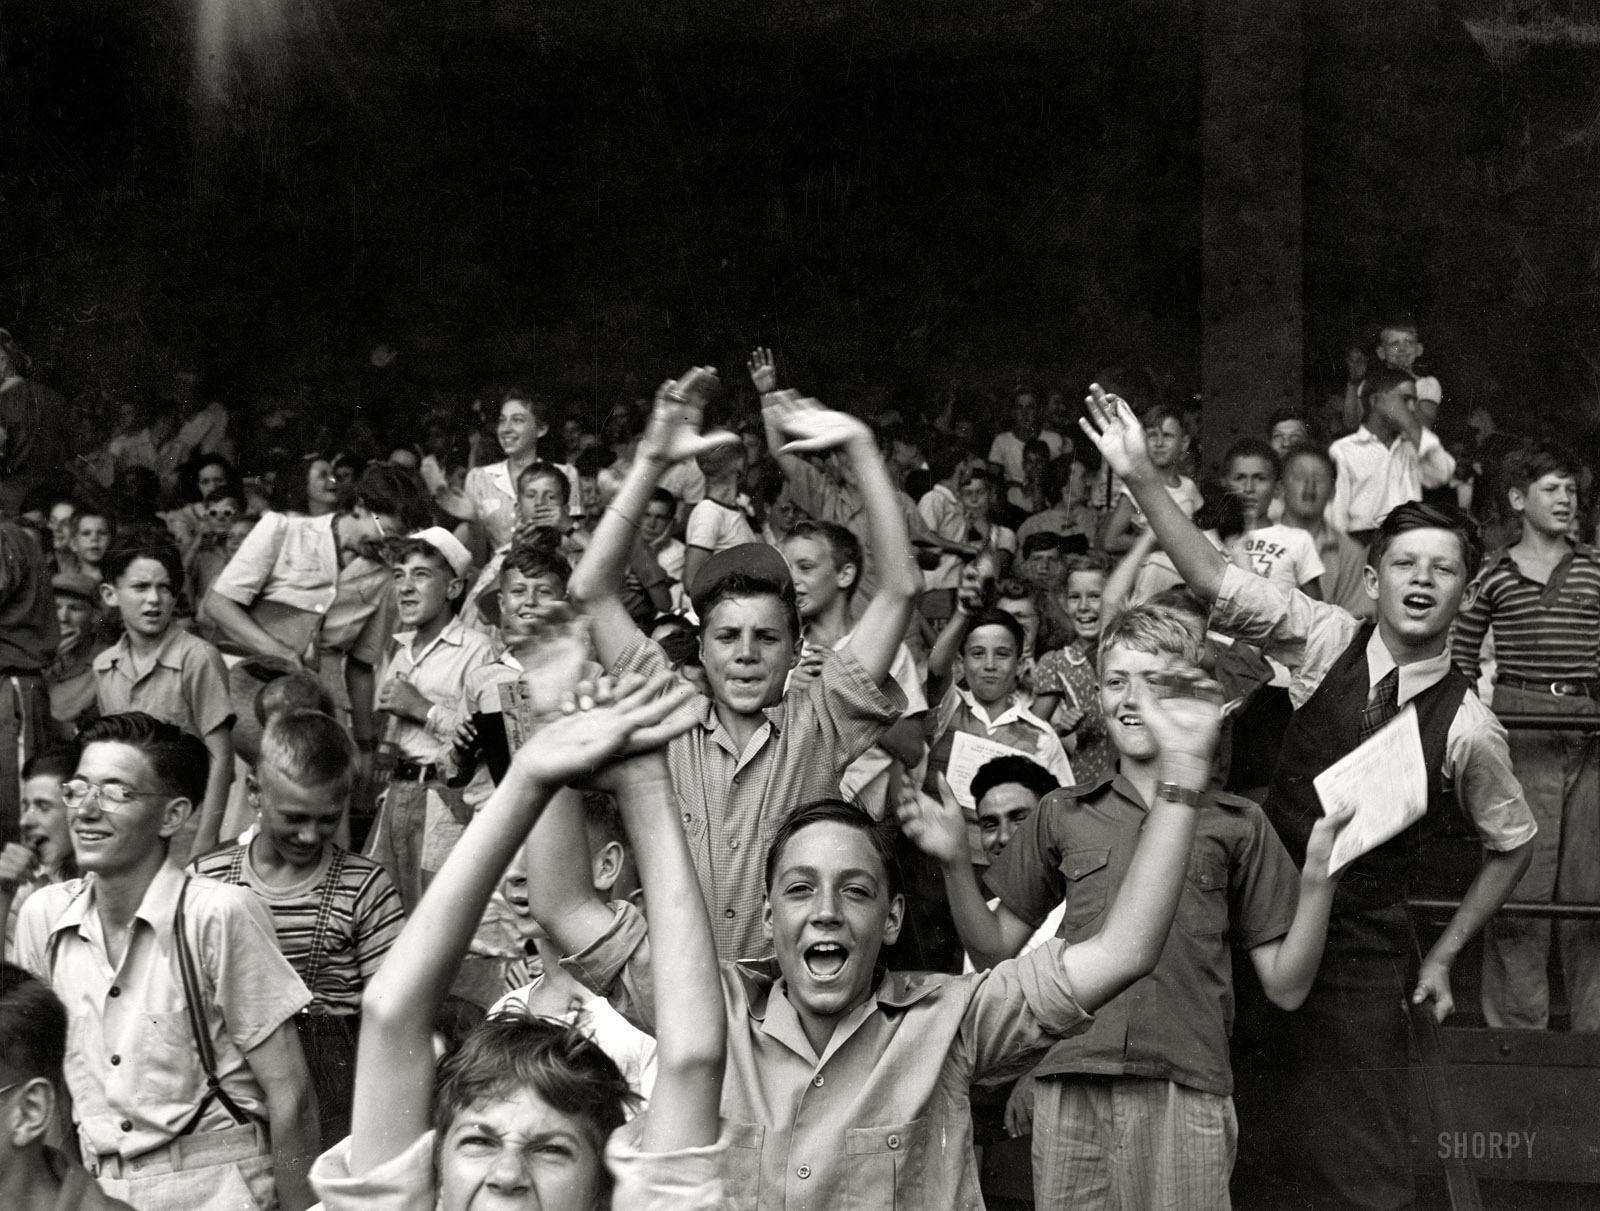 August 1942. Detroit, Michigan. "Kids at ballgame, Briggs Stadium." Photo by John Vachon for the Office of War Information. View full size.
